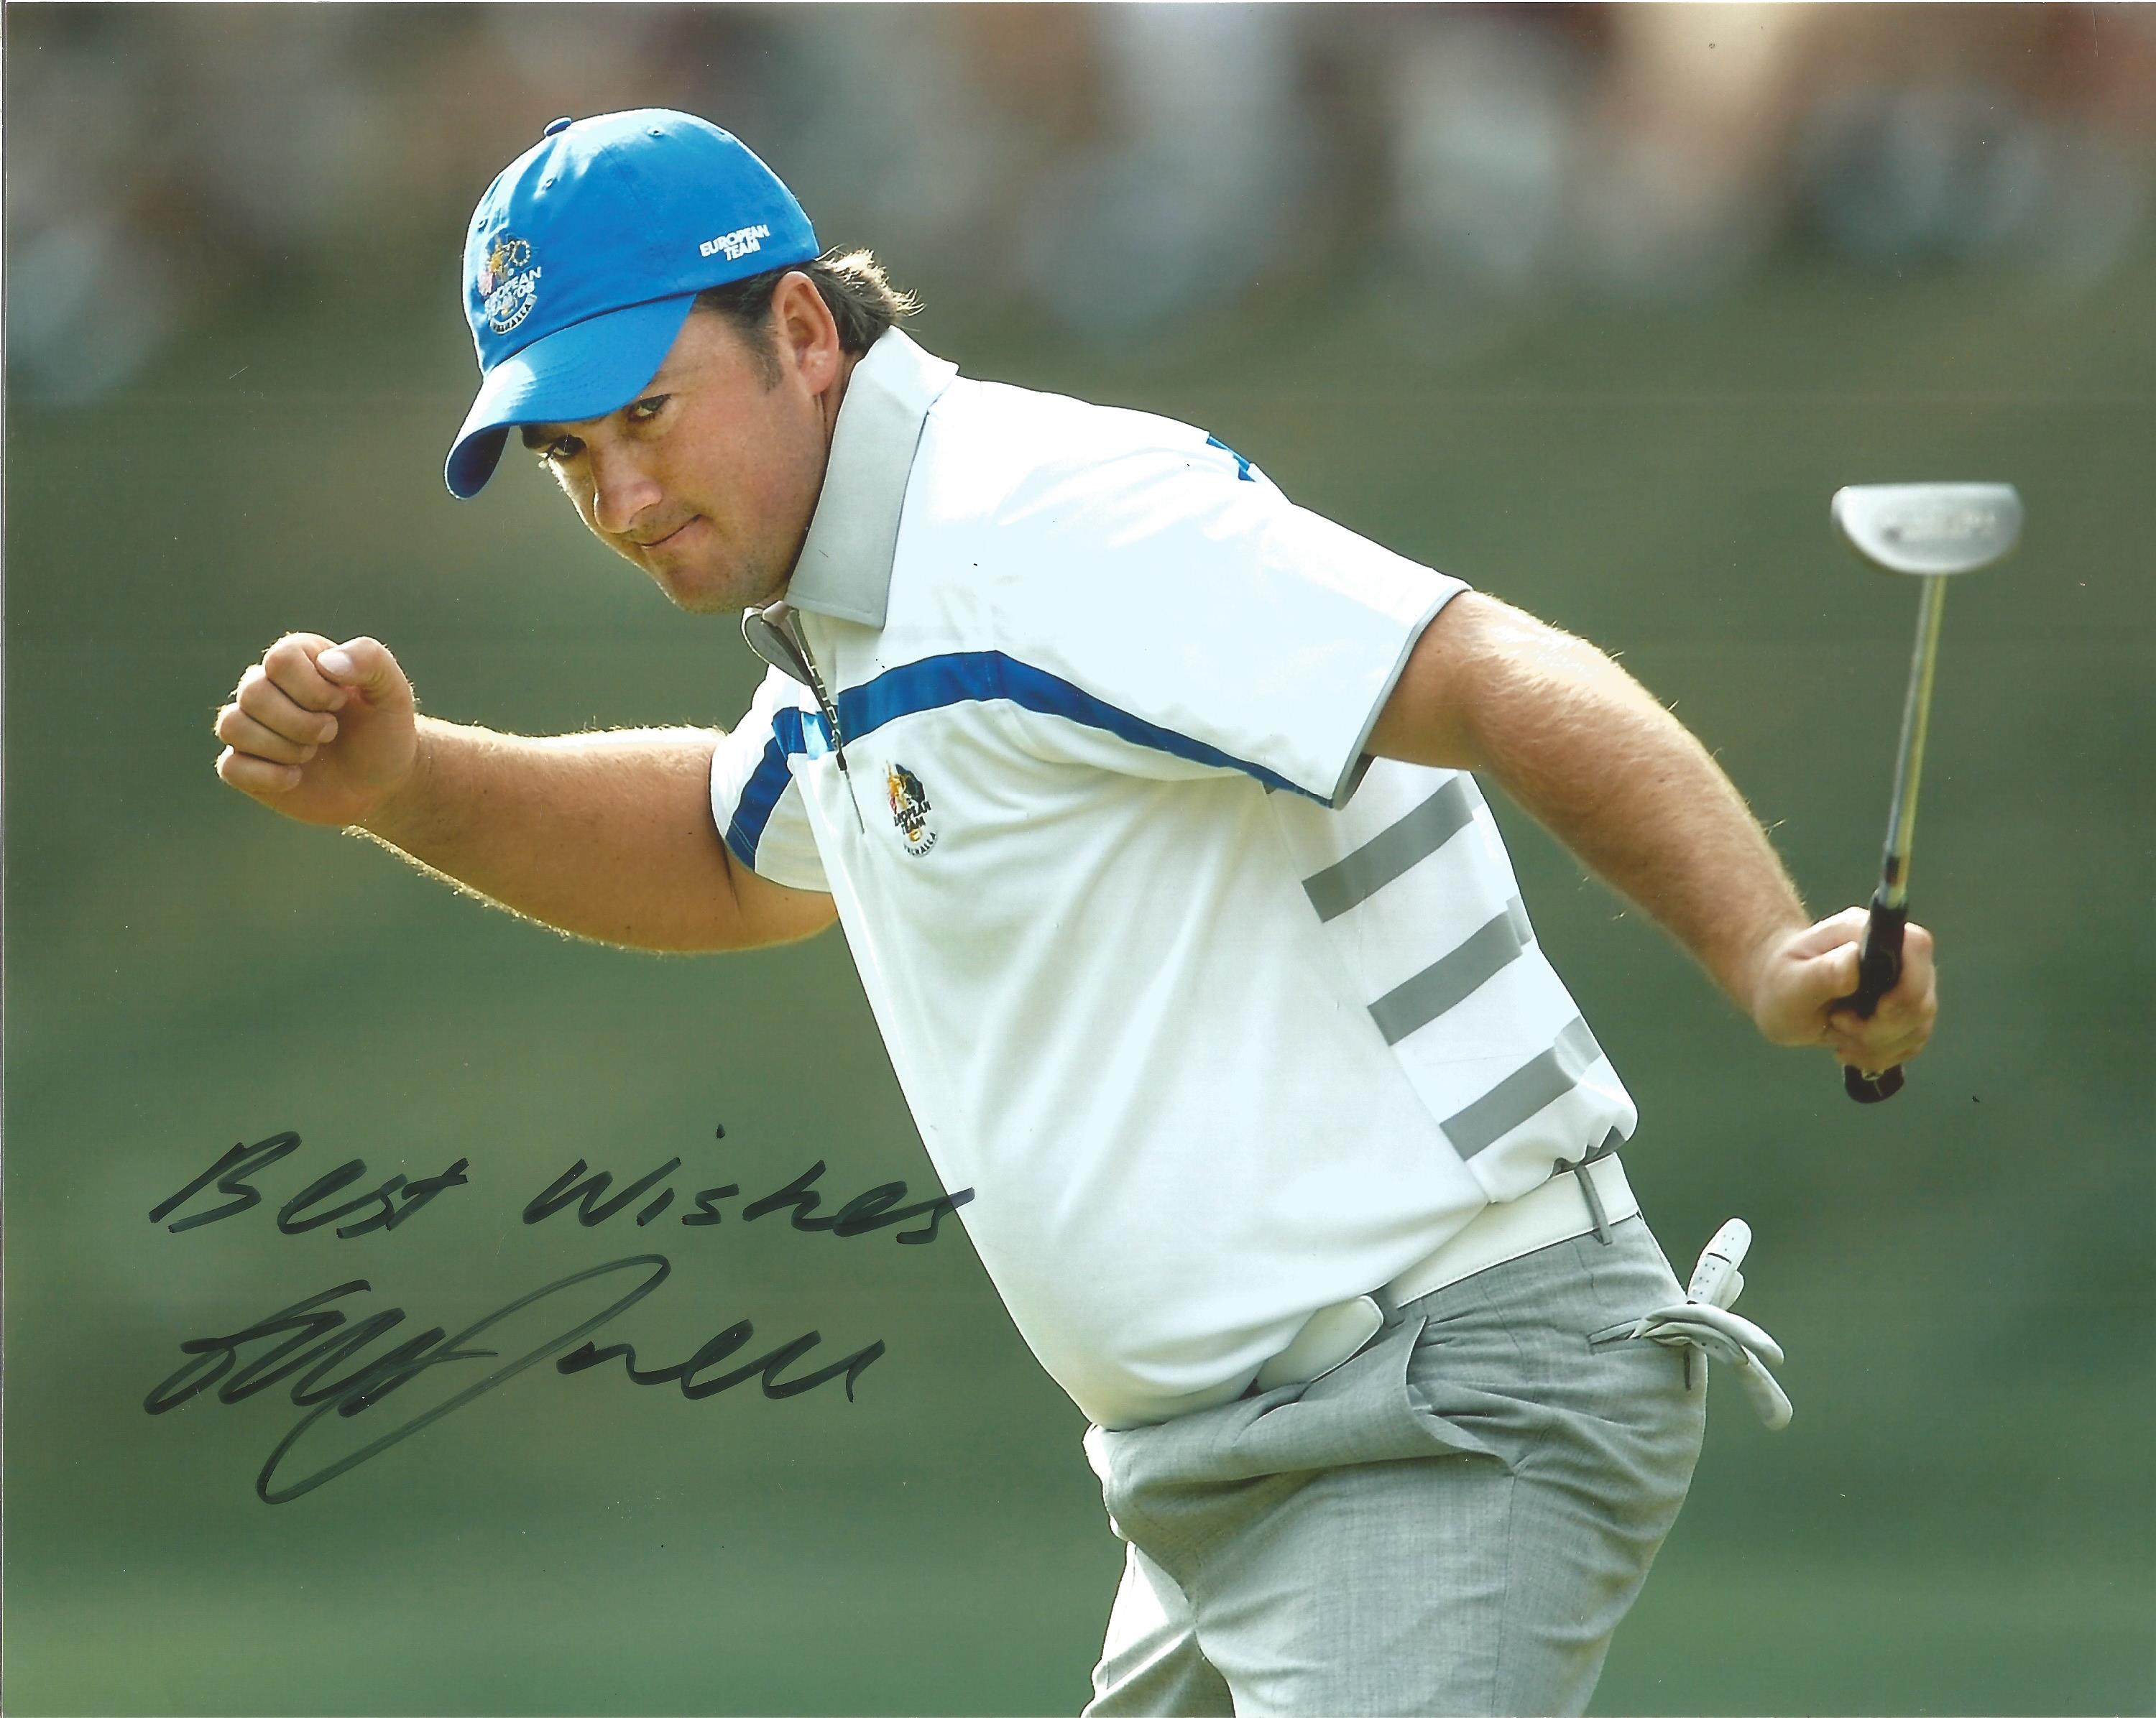 Graeme Mcdowell Signed Ryder Cup Golf 8x10 Photo. Good condition. All autographs come with a